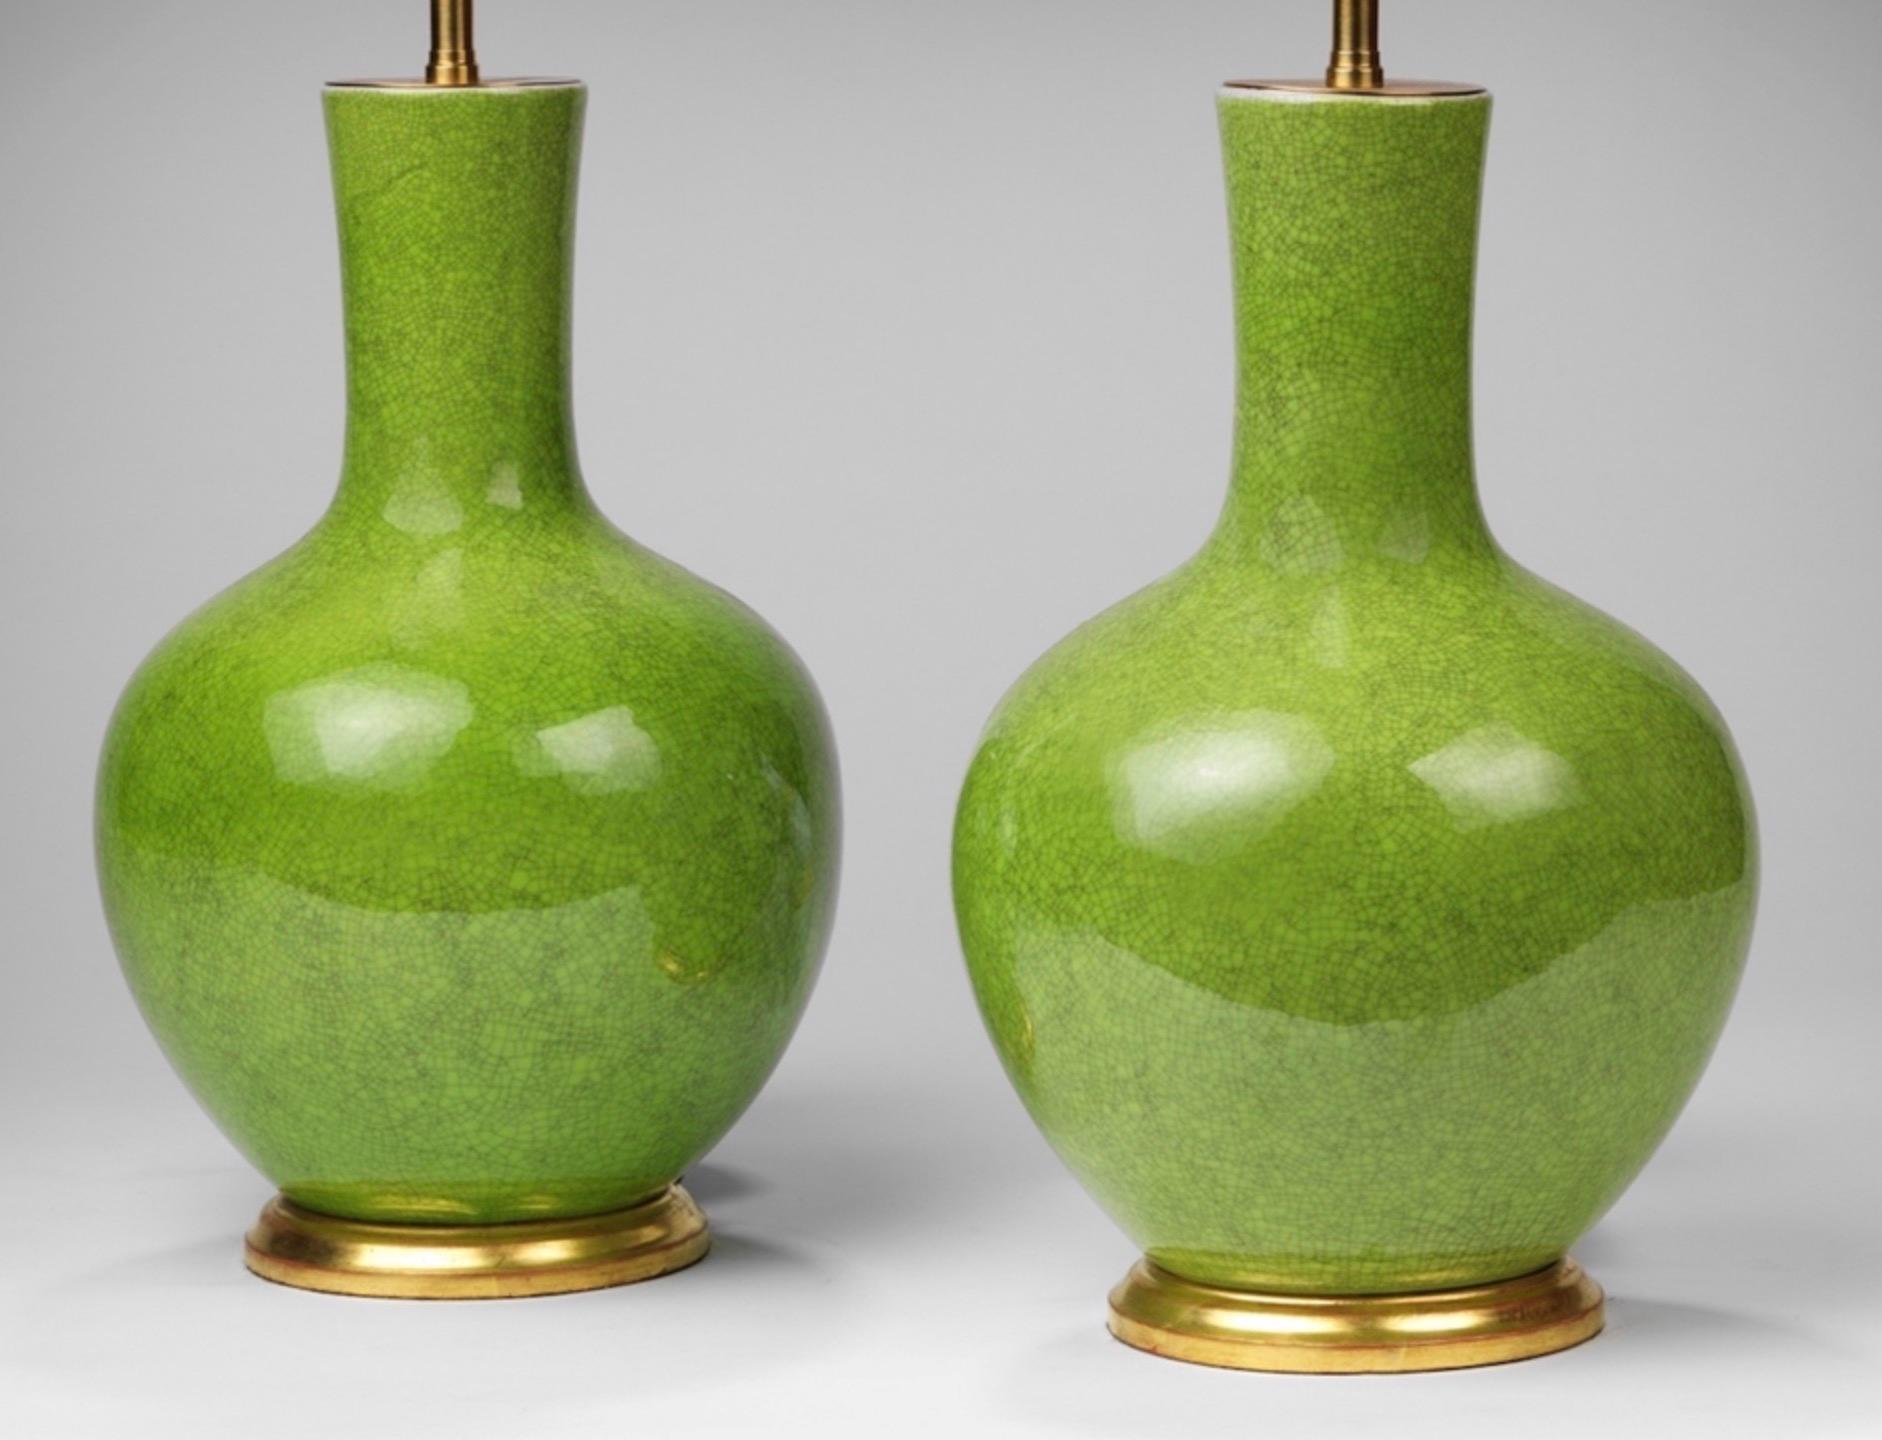 A fine pair of small bright green craquellure straight necked vases, now mounted as a lamps. Ideal for beside tables, or those smaller spaces.

Measures: Height of vases 14 in (36 cm) including the hand gilded bases, but excluding any electrical